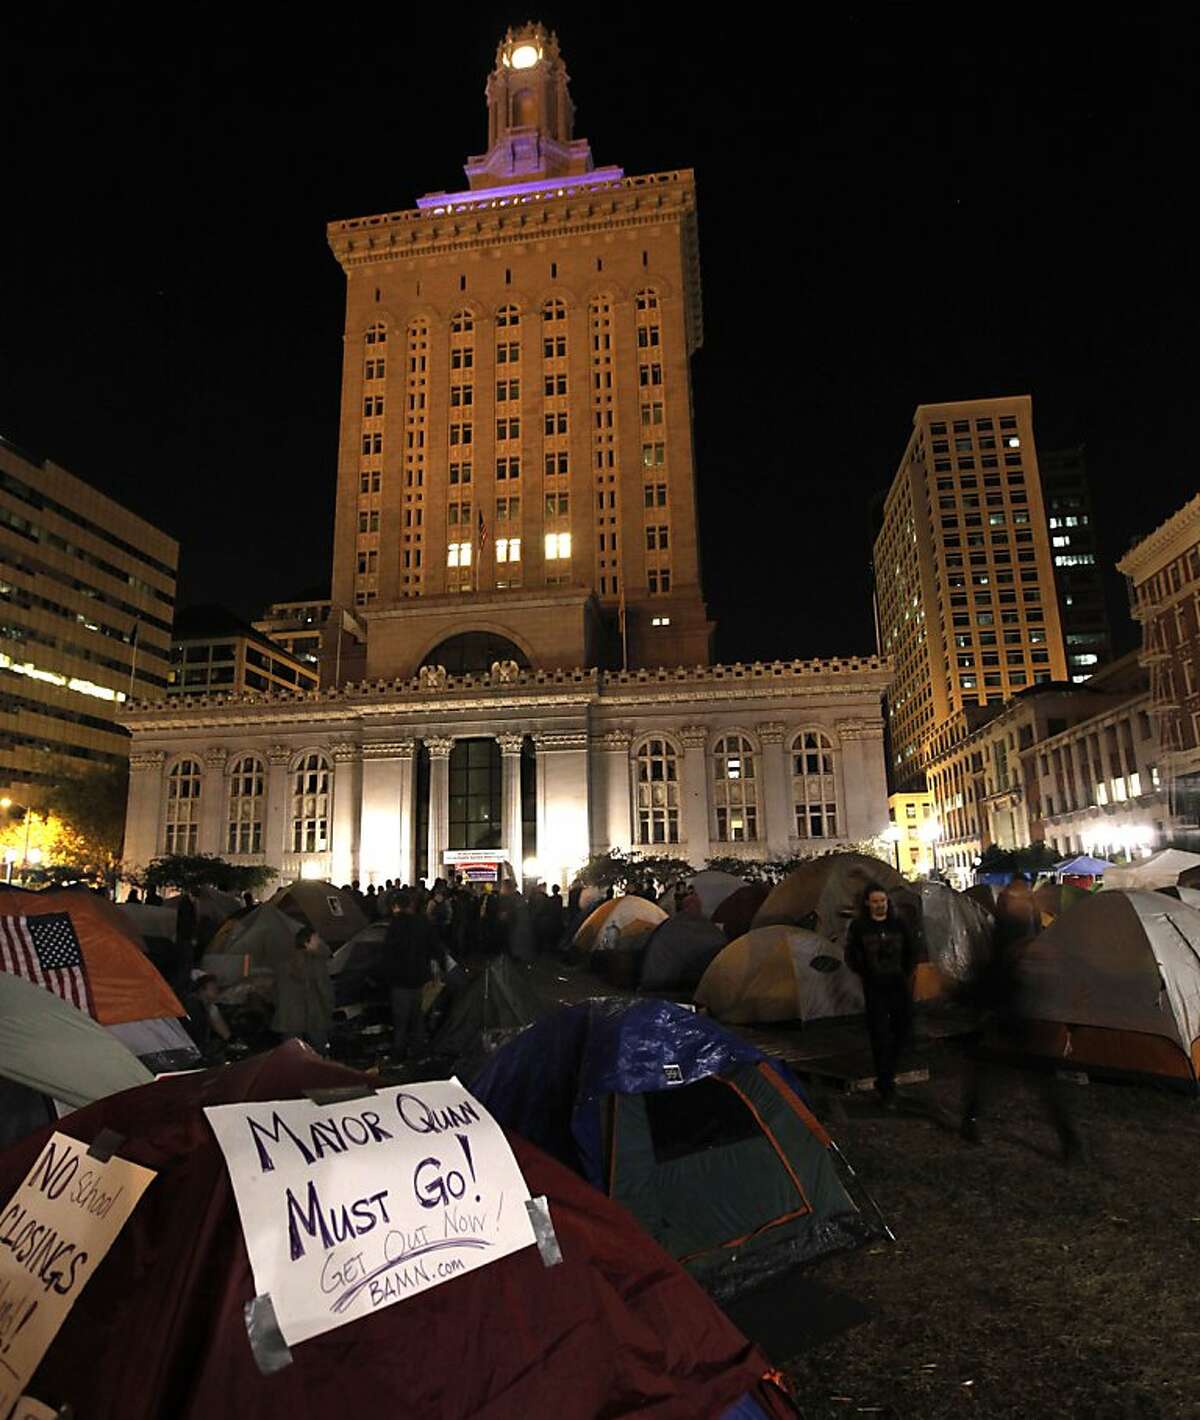 Occupy Oakland protesters continue to grow their encampment in Frank Ogawa Plaza in front of city hall in Oakland, Ca. on Saturday October 29, 2011.